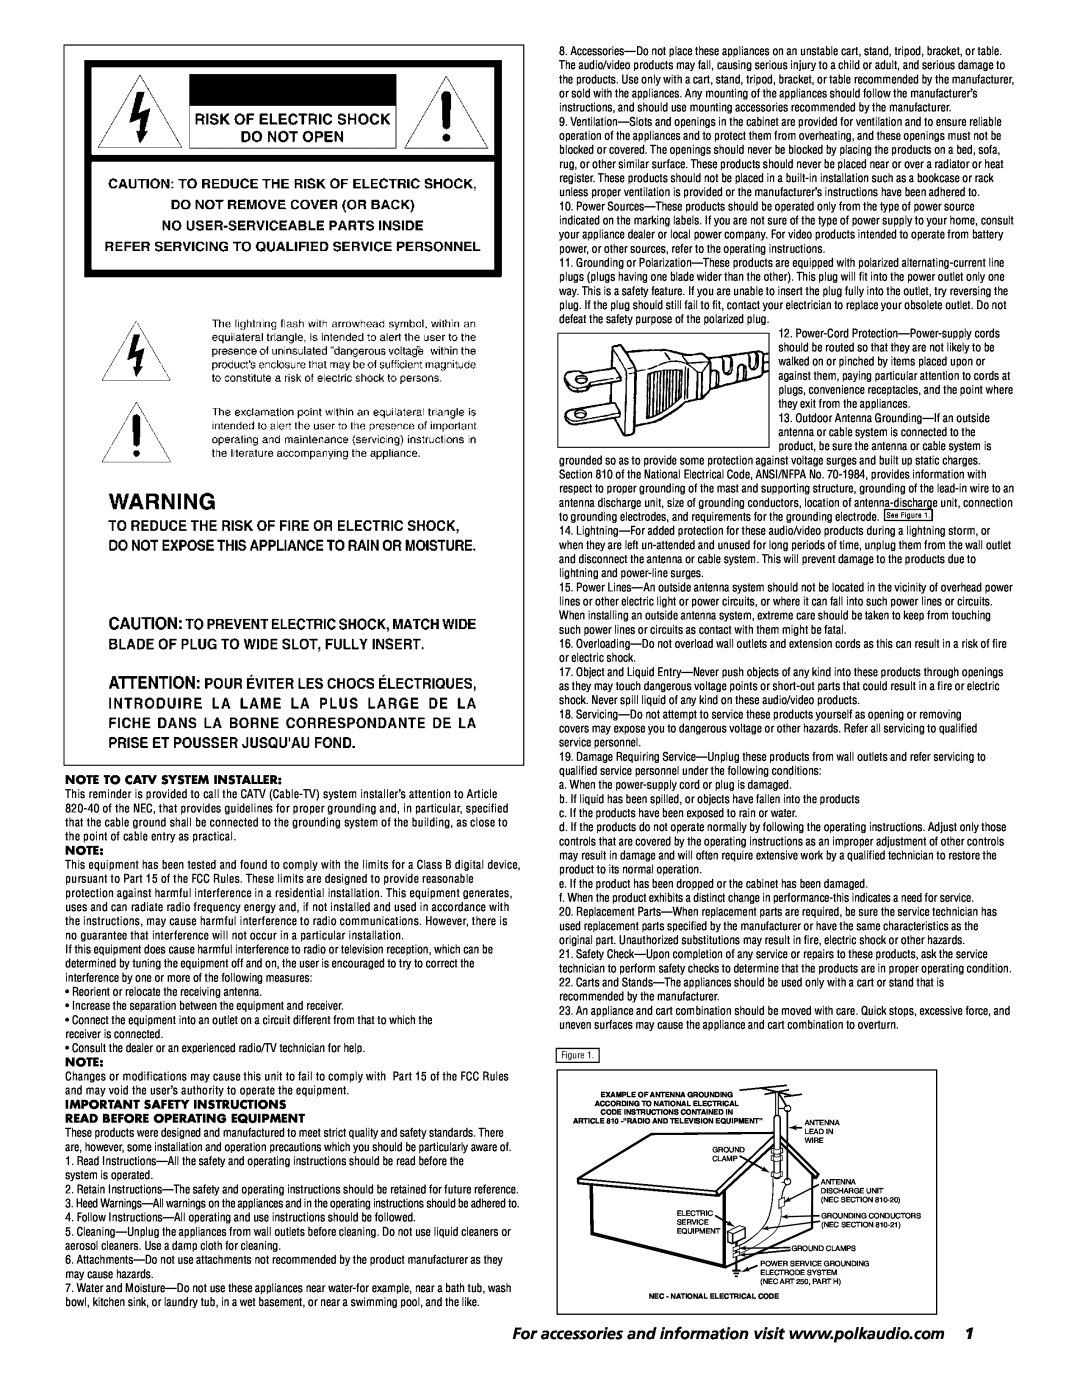 Polk Audio AMR 130 Note To Catv System Installer, Important Safety Instructions, Read Before Operating Equipment 